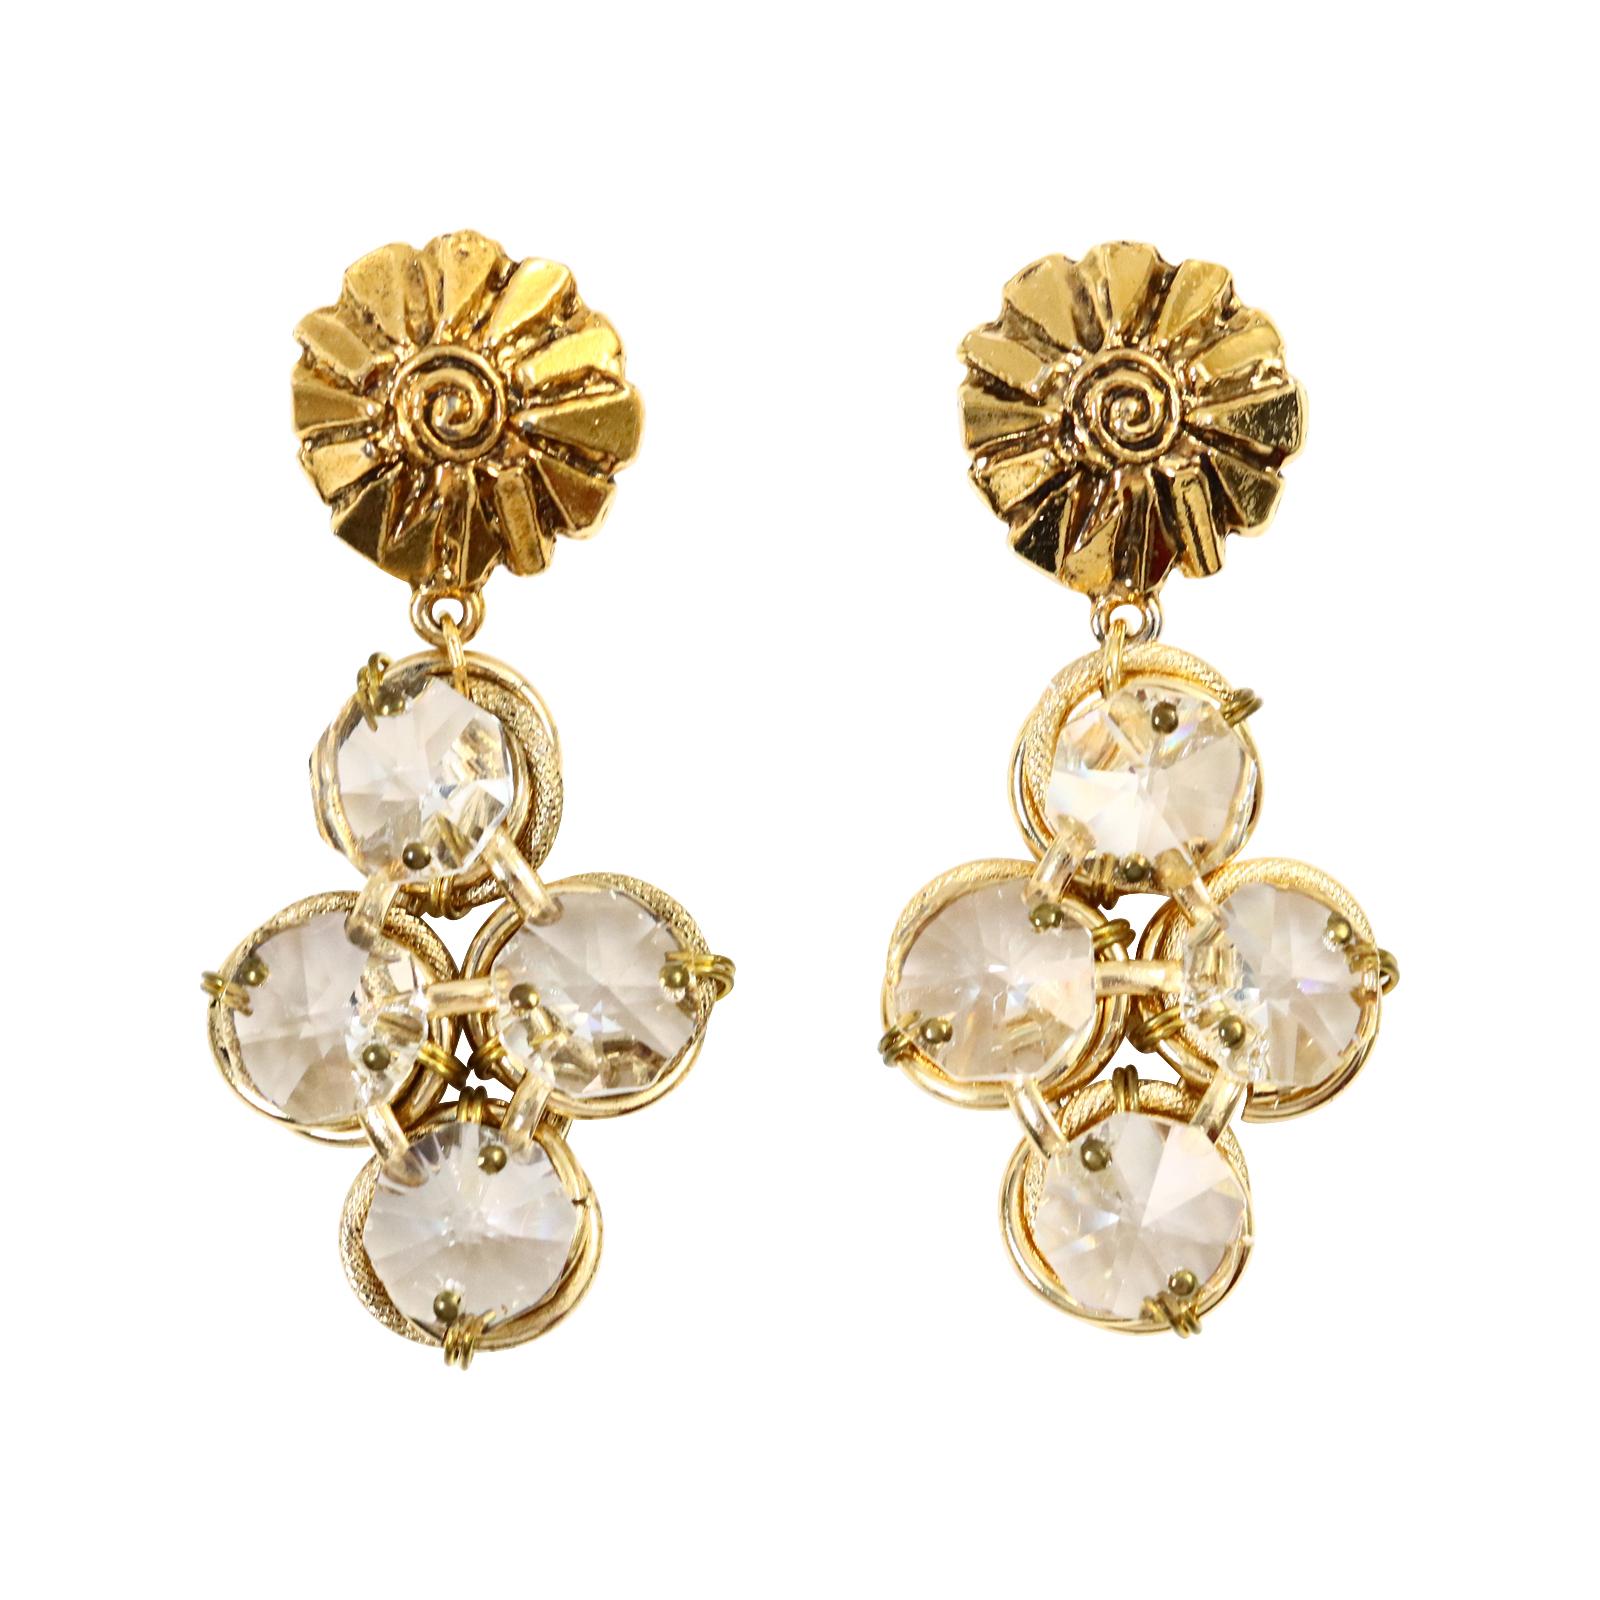 Vintage Poggi Paris Gold Tone With Large Crystals Dangling Earrings Circa 1990s.  These spectacular earrings are so chic and also look so classic at the same time. The button like structure that is gold tone that the crystals dangle from give it a